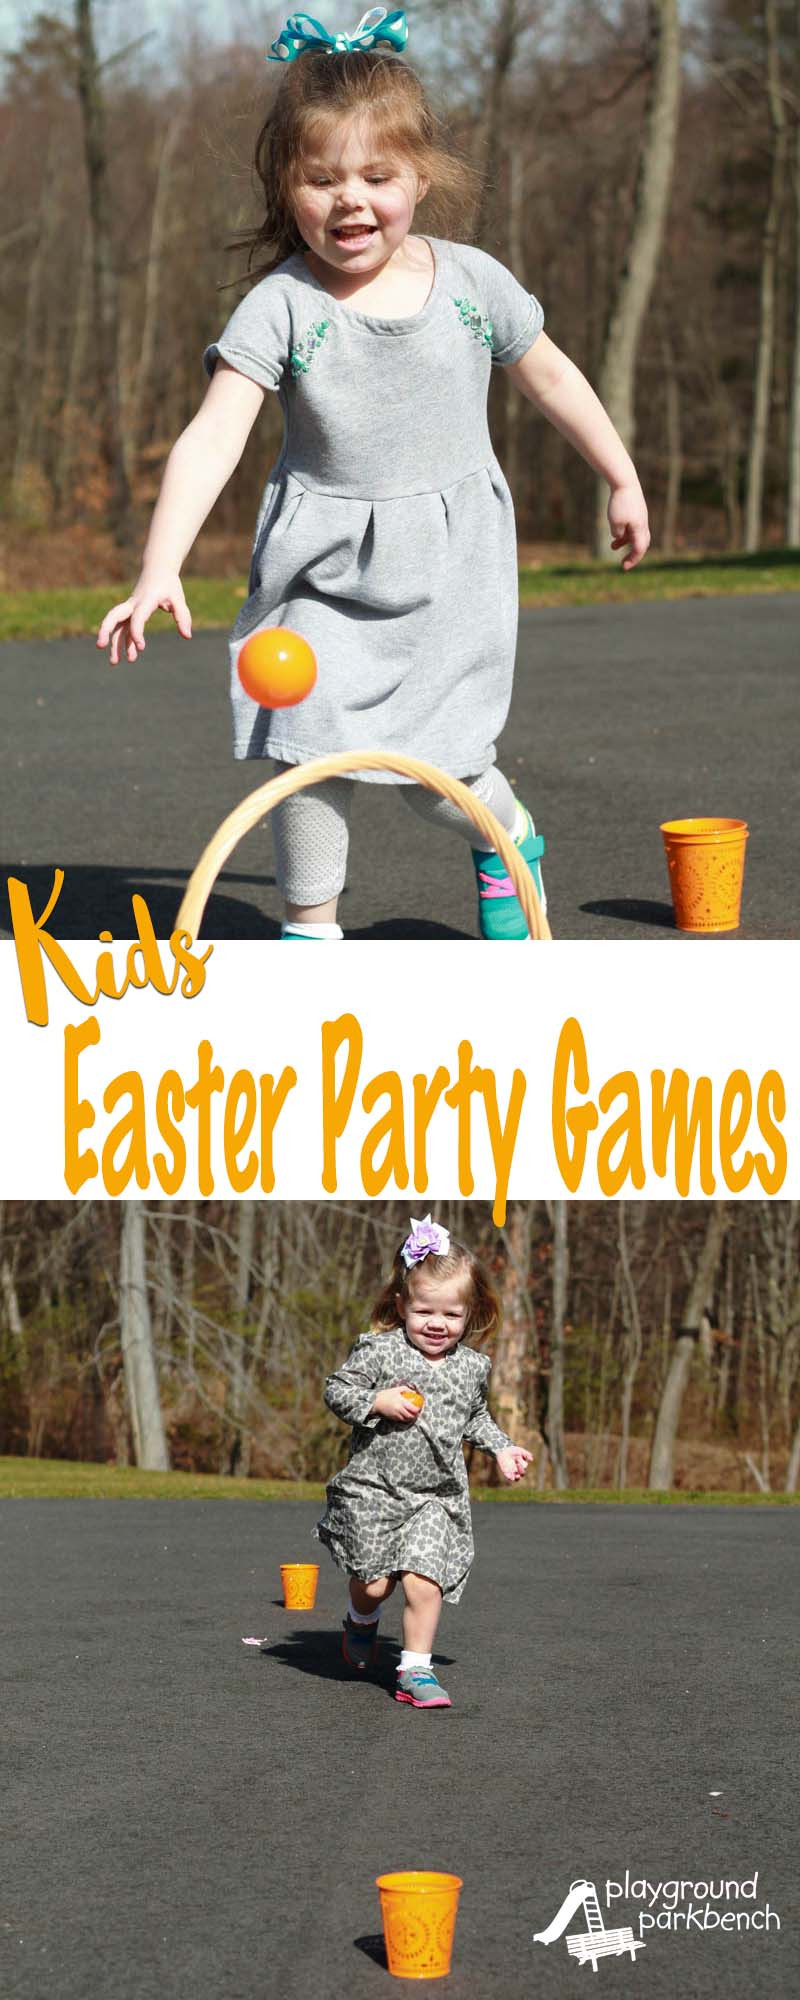 Easter Party Games For Kids
 Kids Easter Party Games